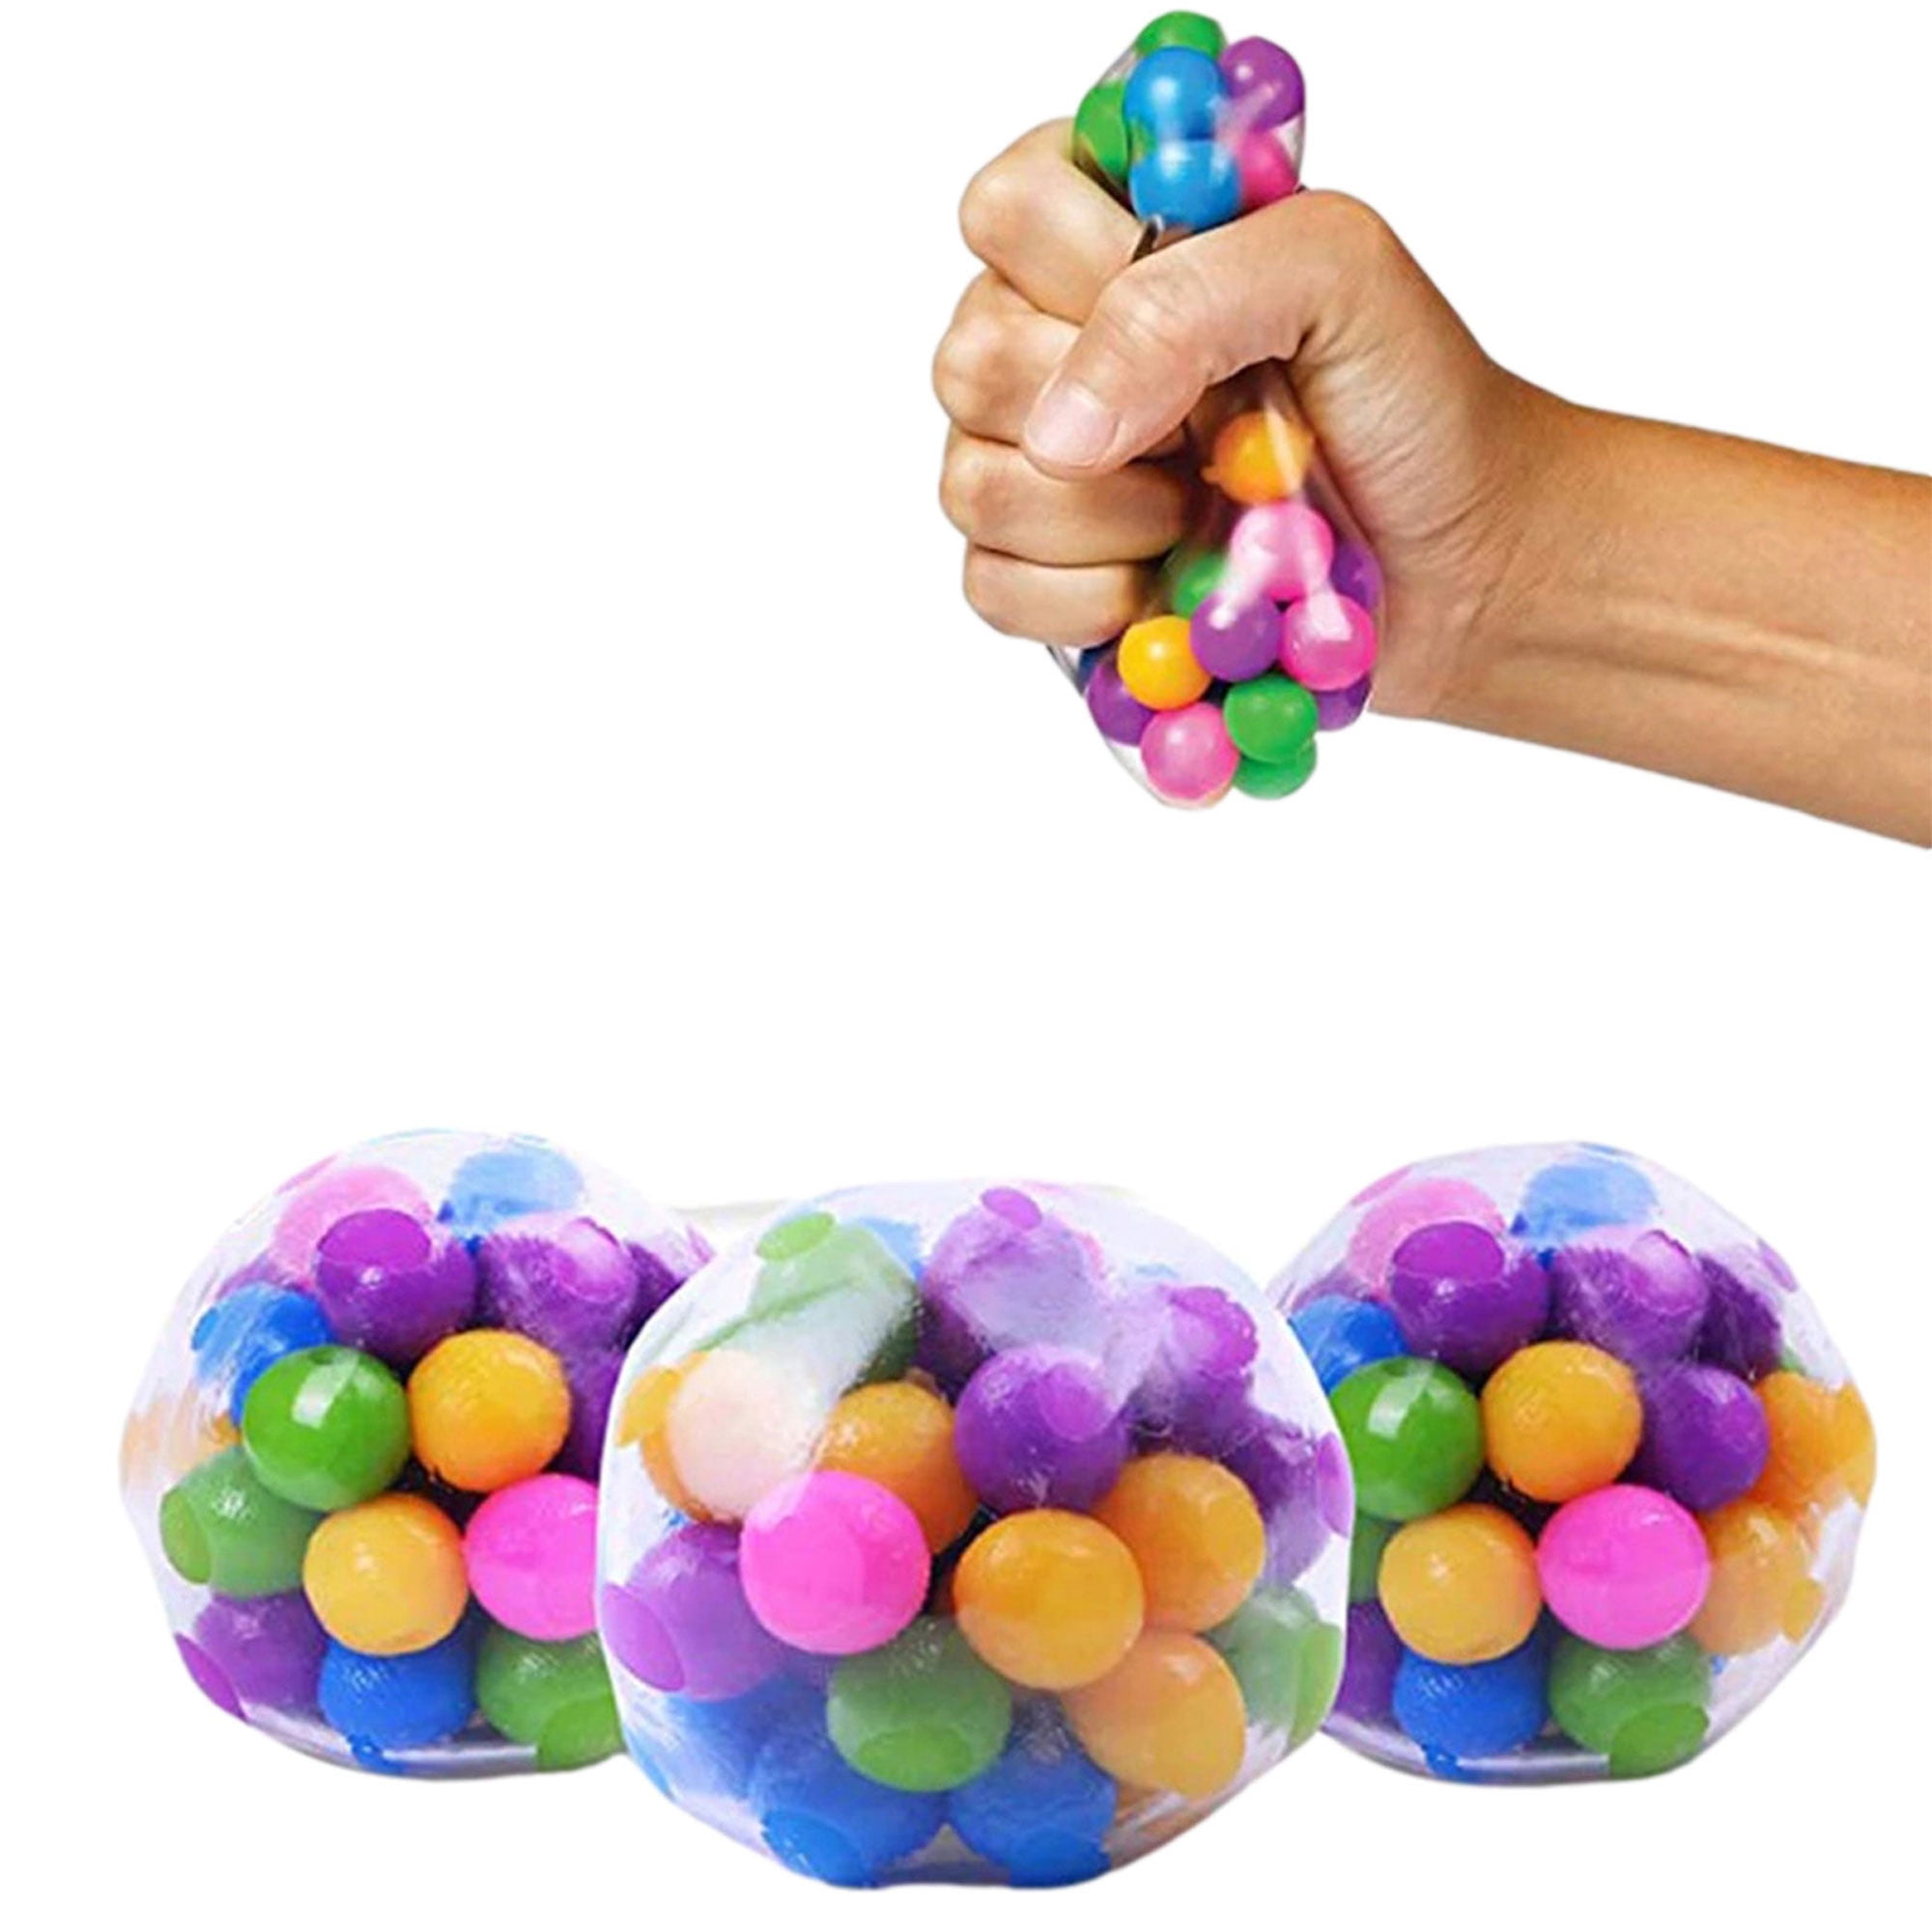 SV15503 STRESS RELIEVER SQUEEZE TOY COLOURFUL Details about   HGL FLASH SQUEEZE CONFETTI BALL 